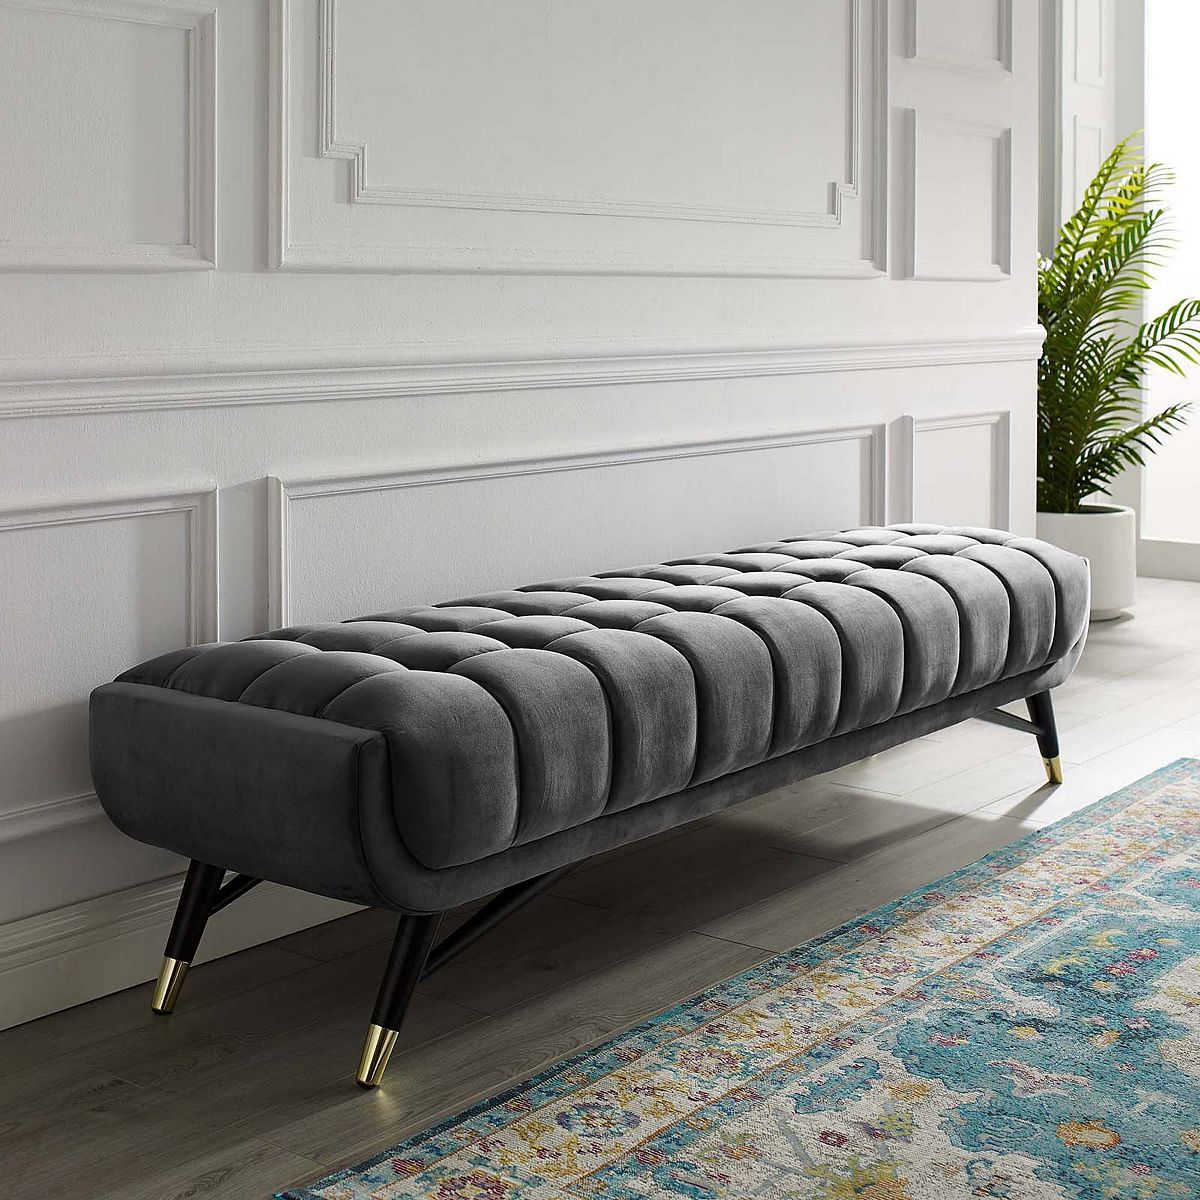 Decoding The Popularity Of The Bedroom Upholstered Bench